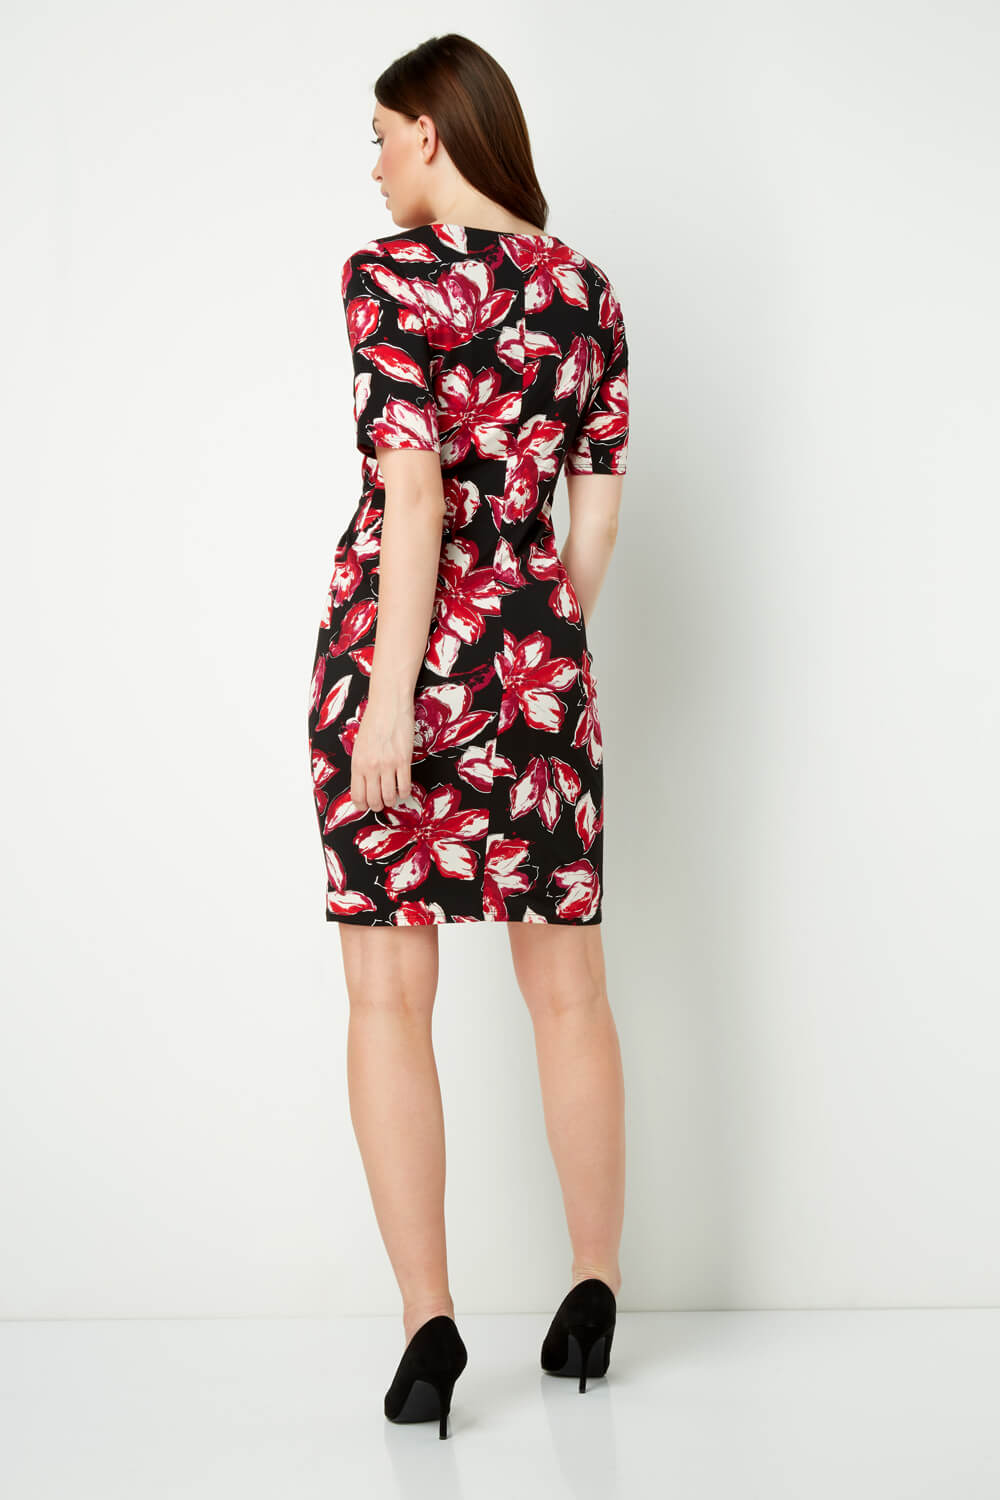 Red Floral Print Dress, Image 2 of 4